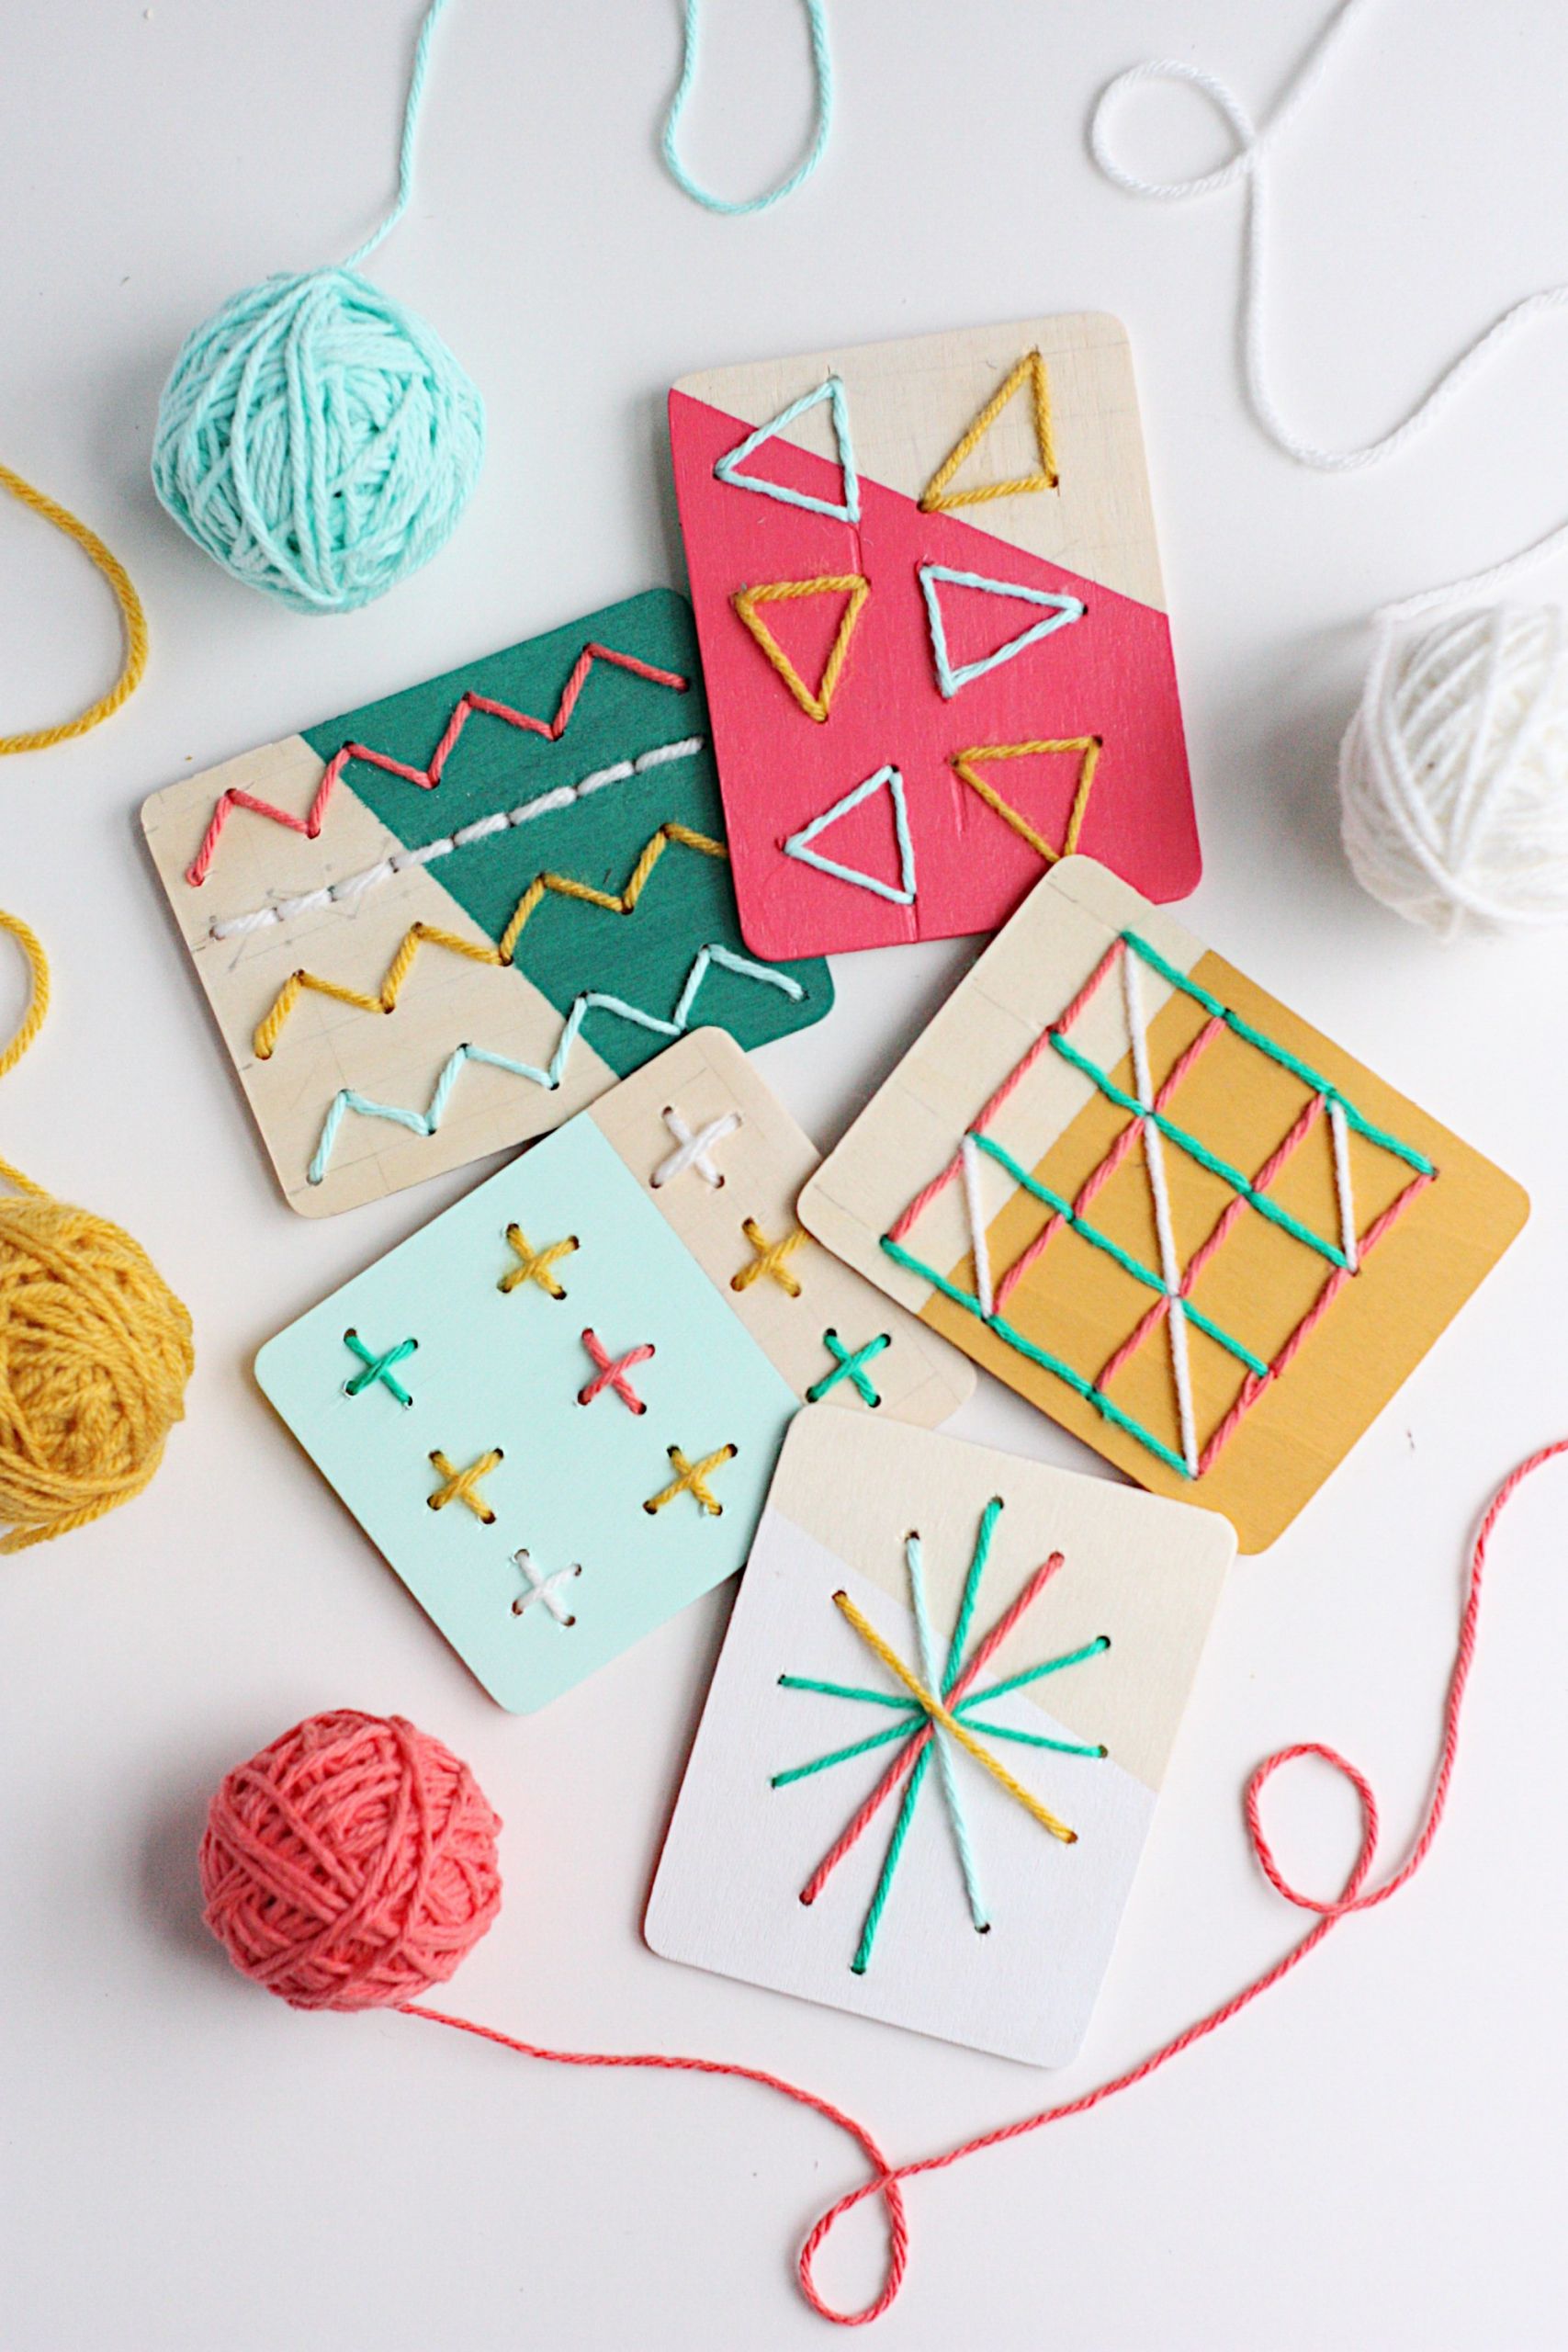 Crafting For Kids
 11 DIY Yarn Crafts That Will Amaze Your Kids Shelterness